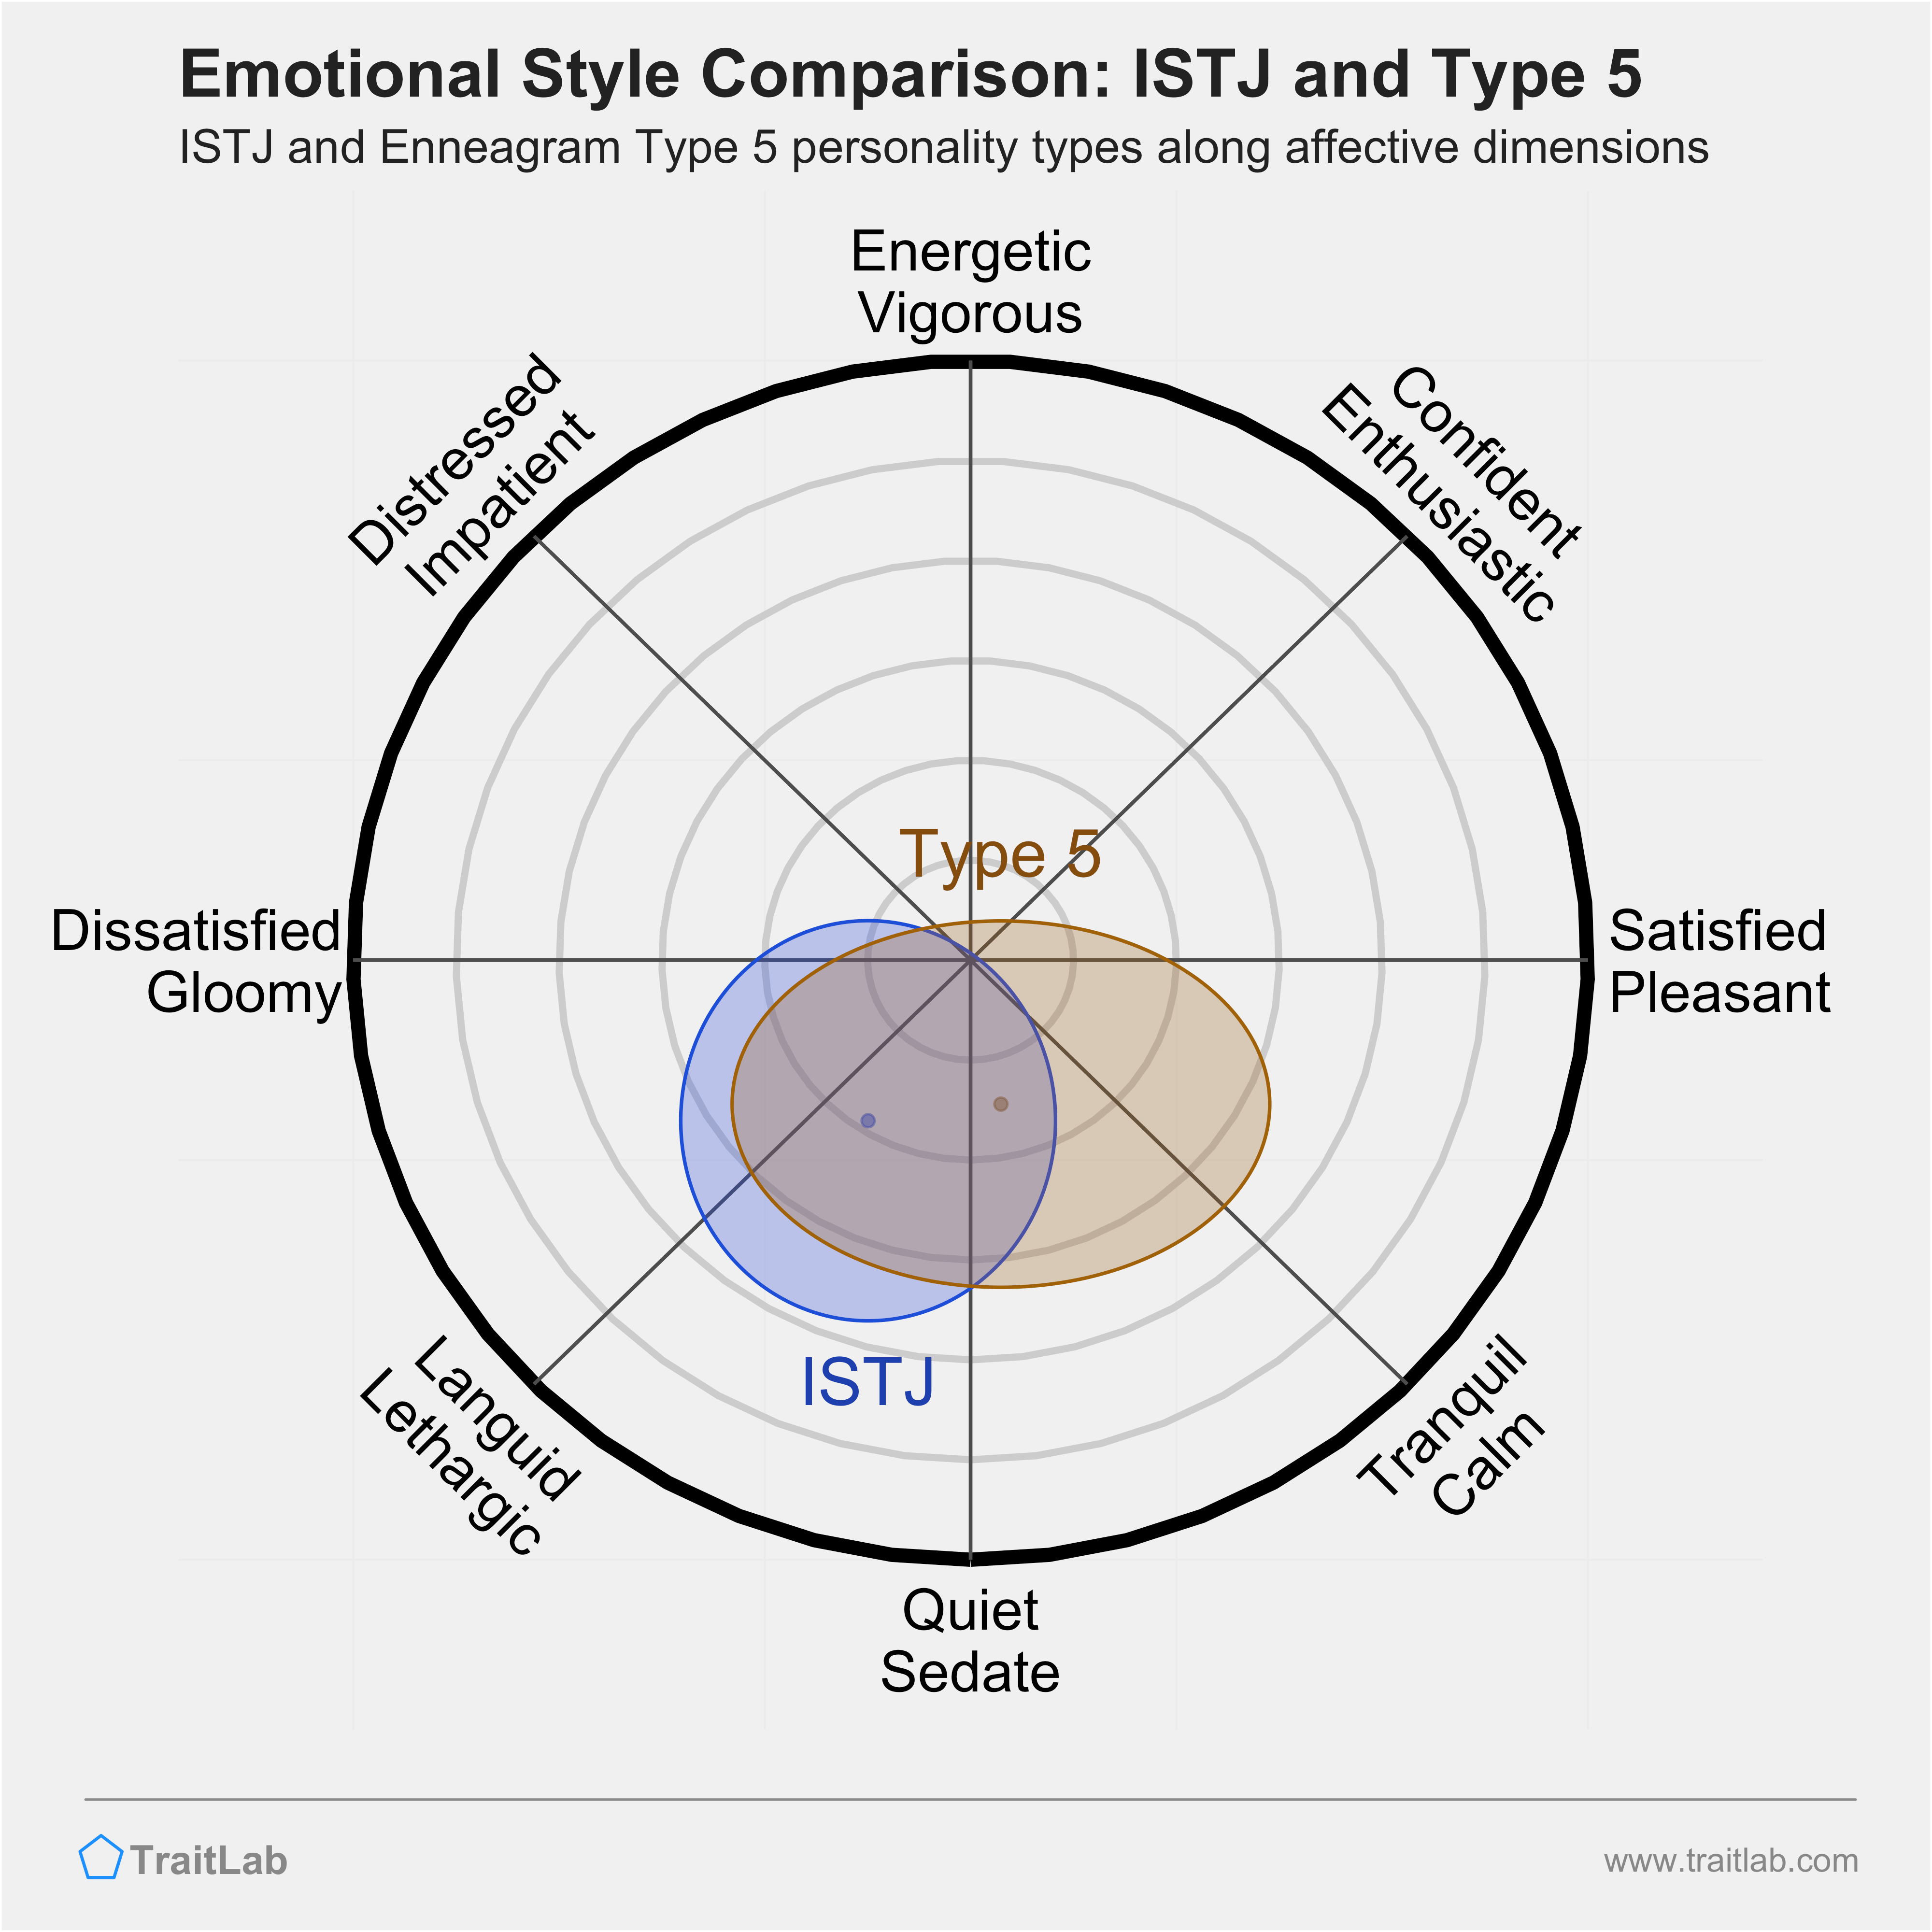 ISTJ and Type 5 comparison across emotional (affective) dimensions